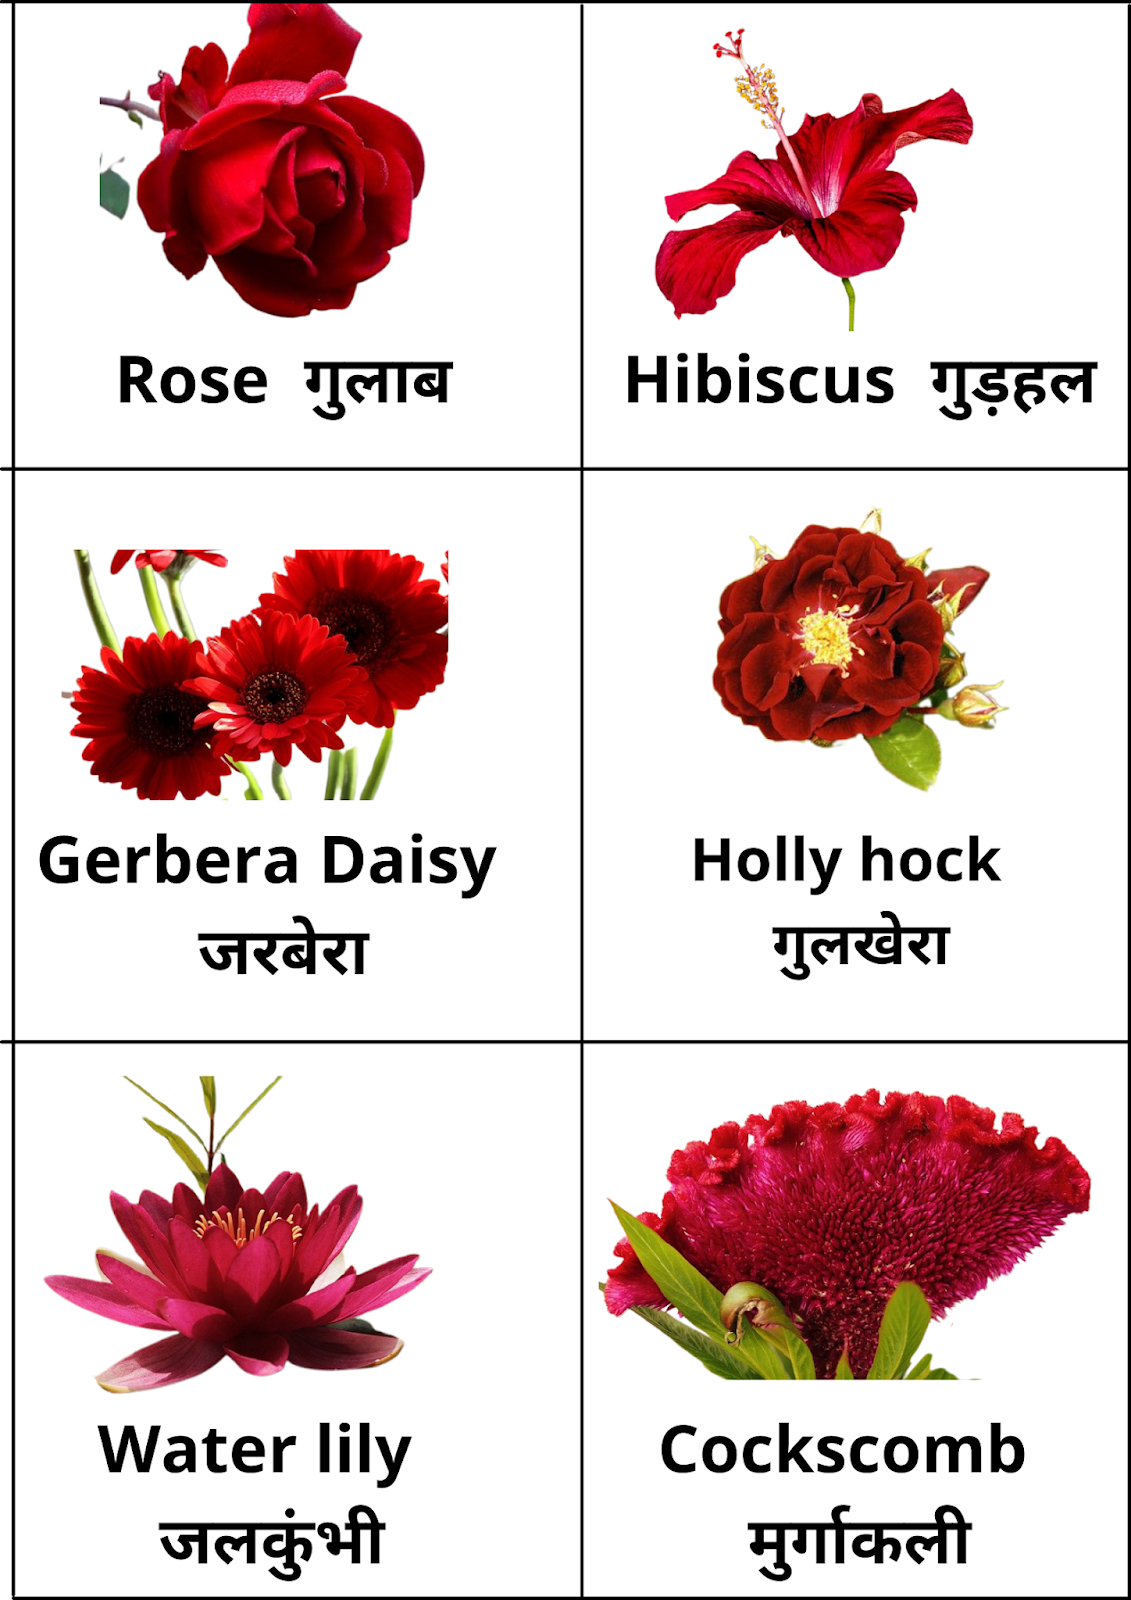 Red flowers name in Hindi and English : लाल फूलों के नाम